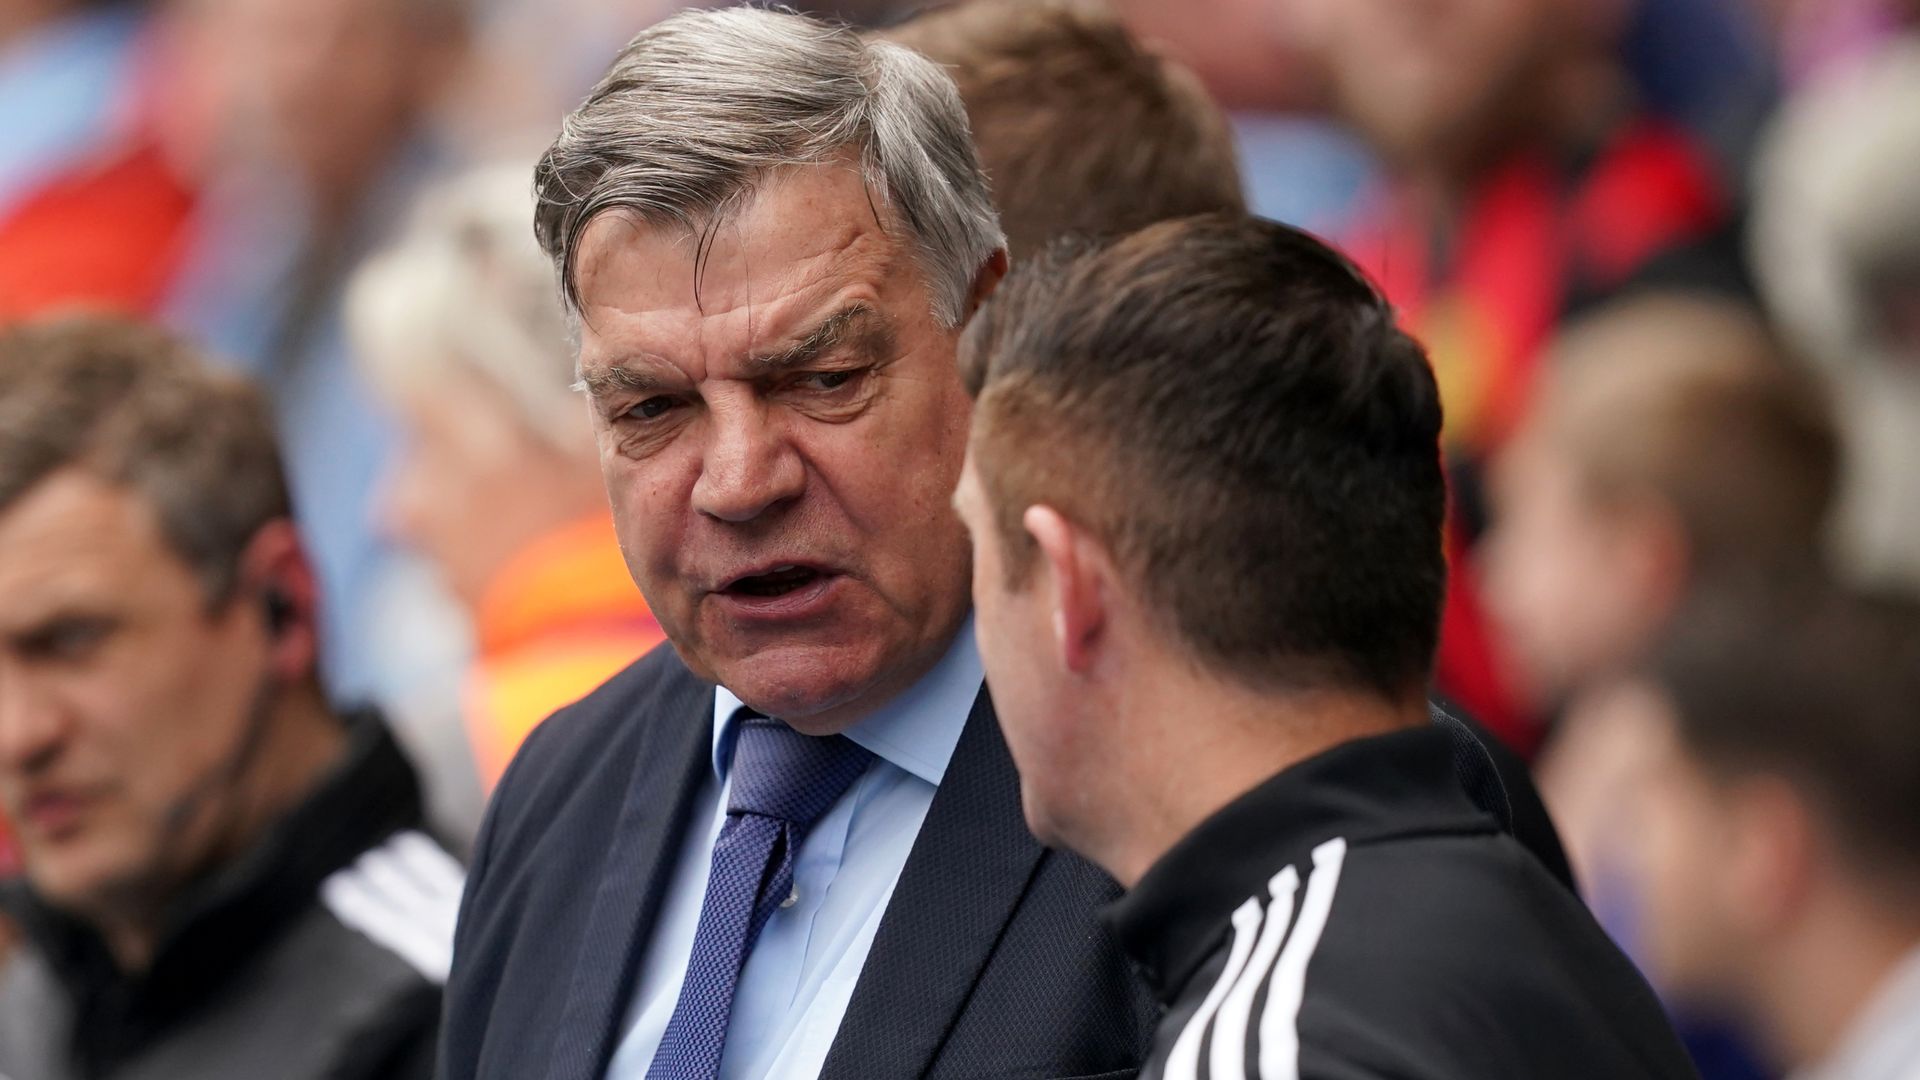 Leeds vs Newcastle preview: Allardyce aims for first win against former side